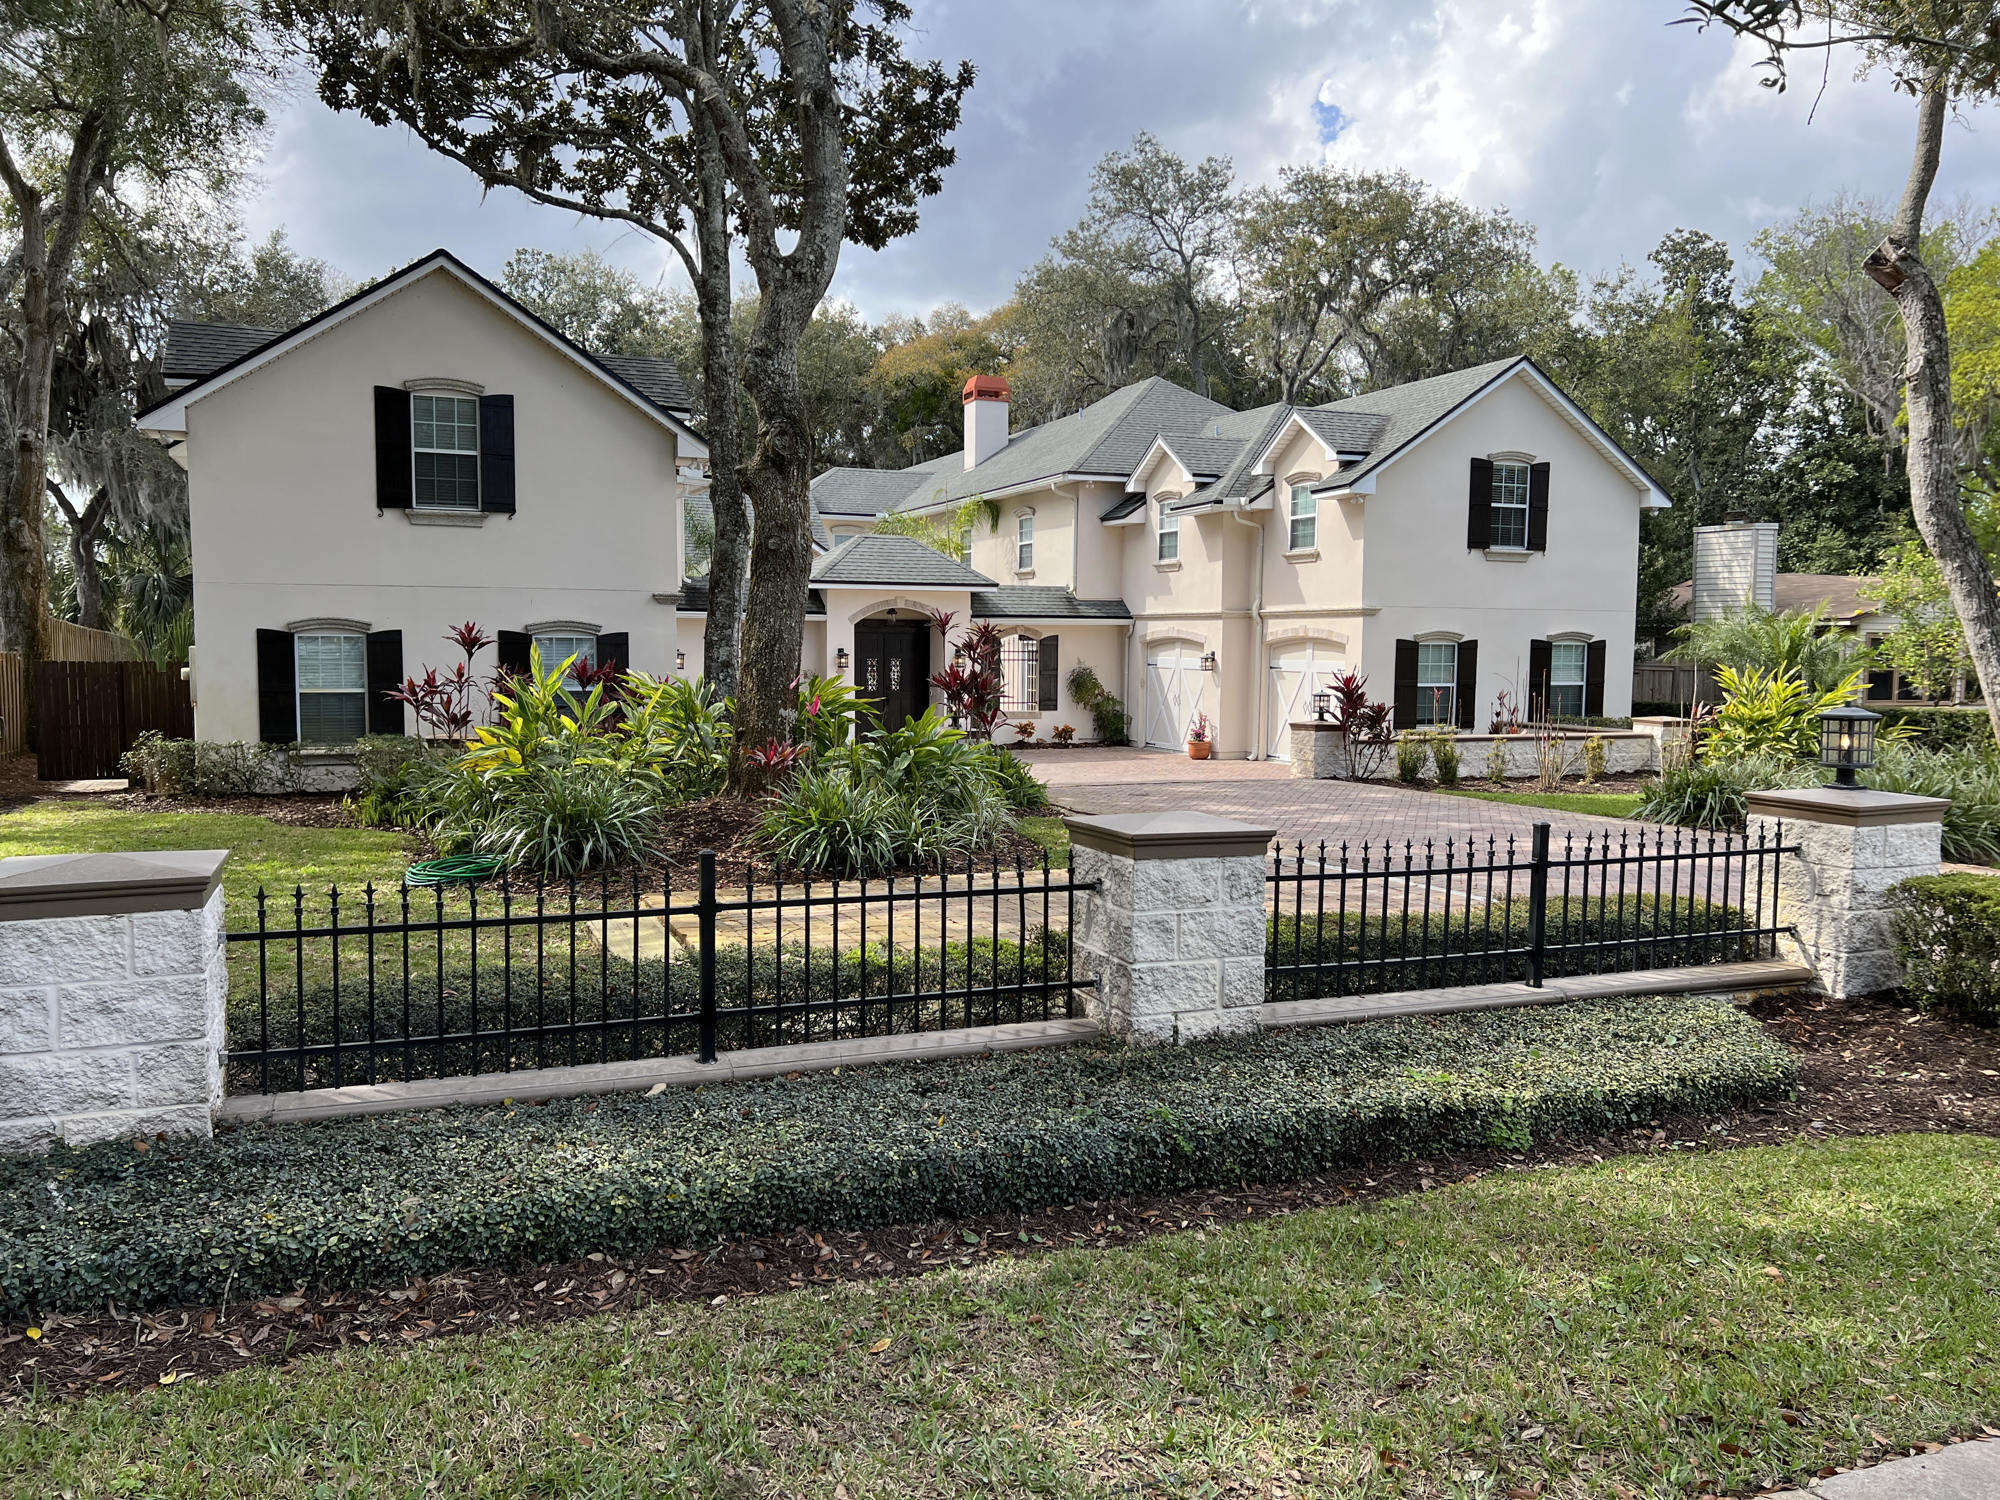 Fired JEA CEO Aaron Zahn sold his Jacksonville home.